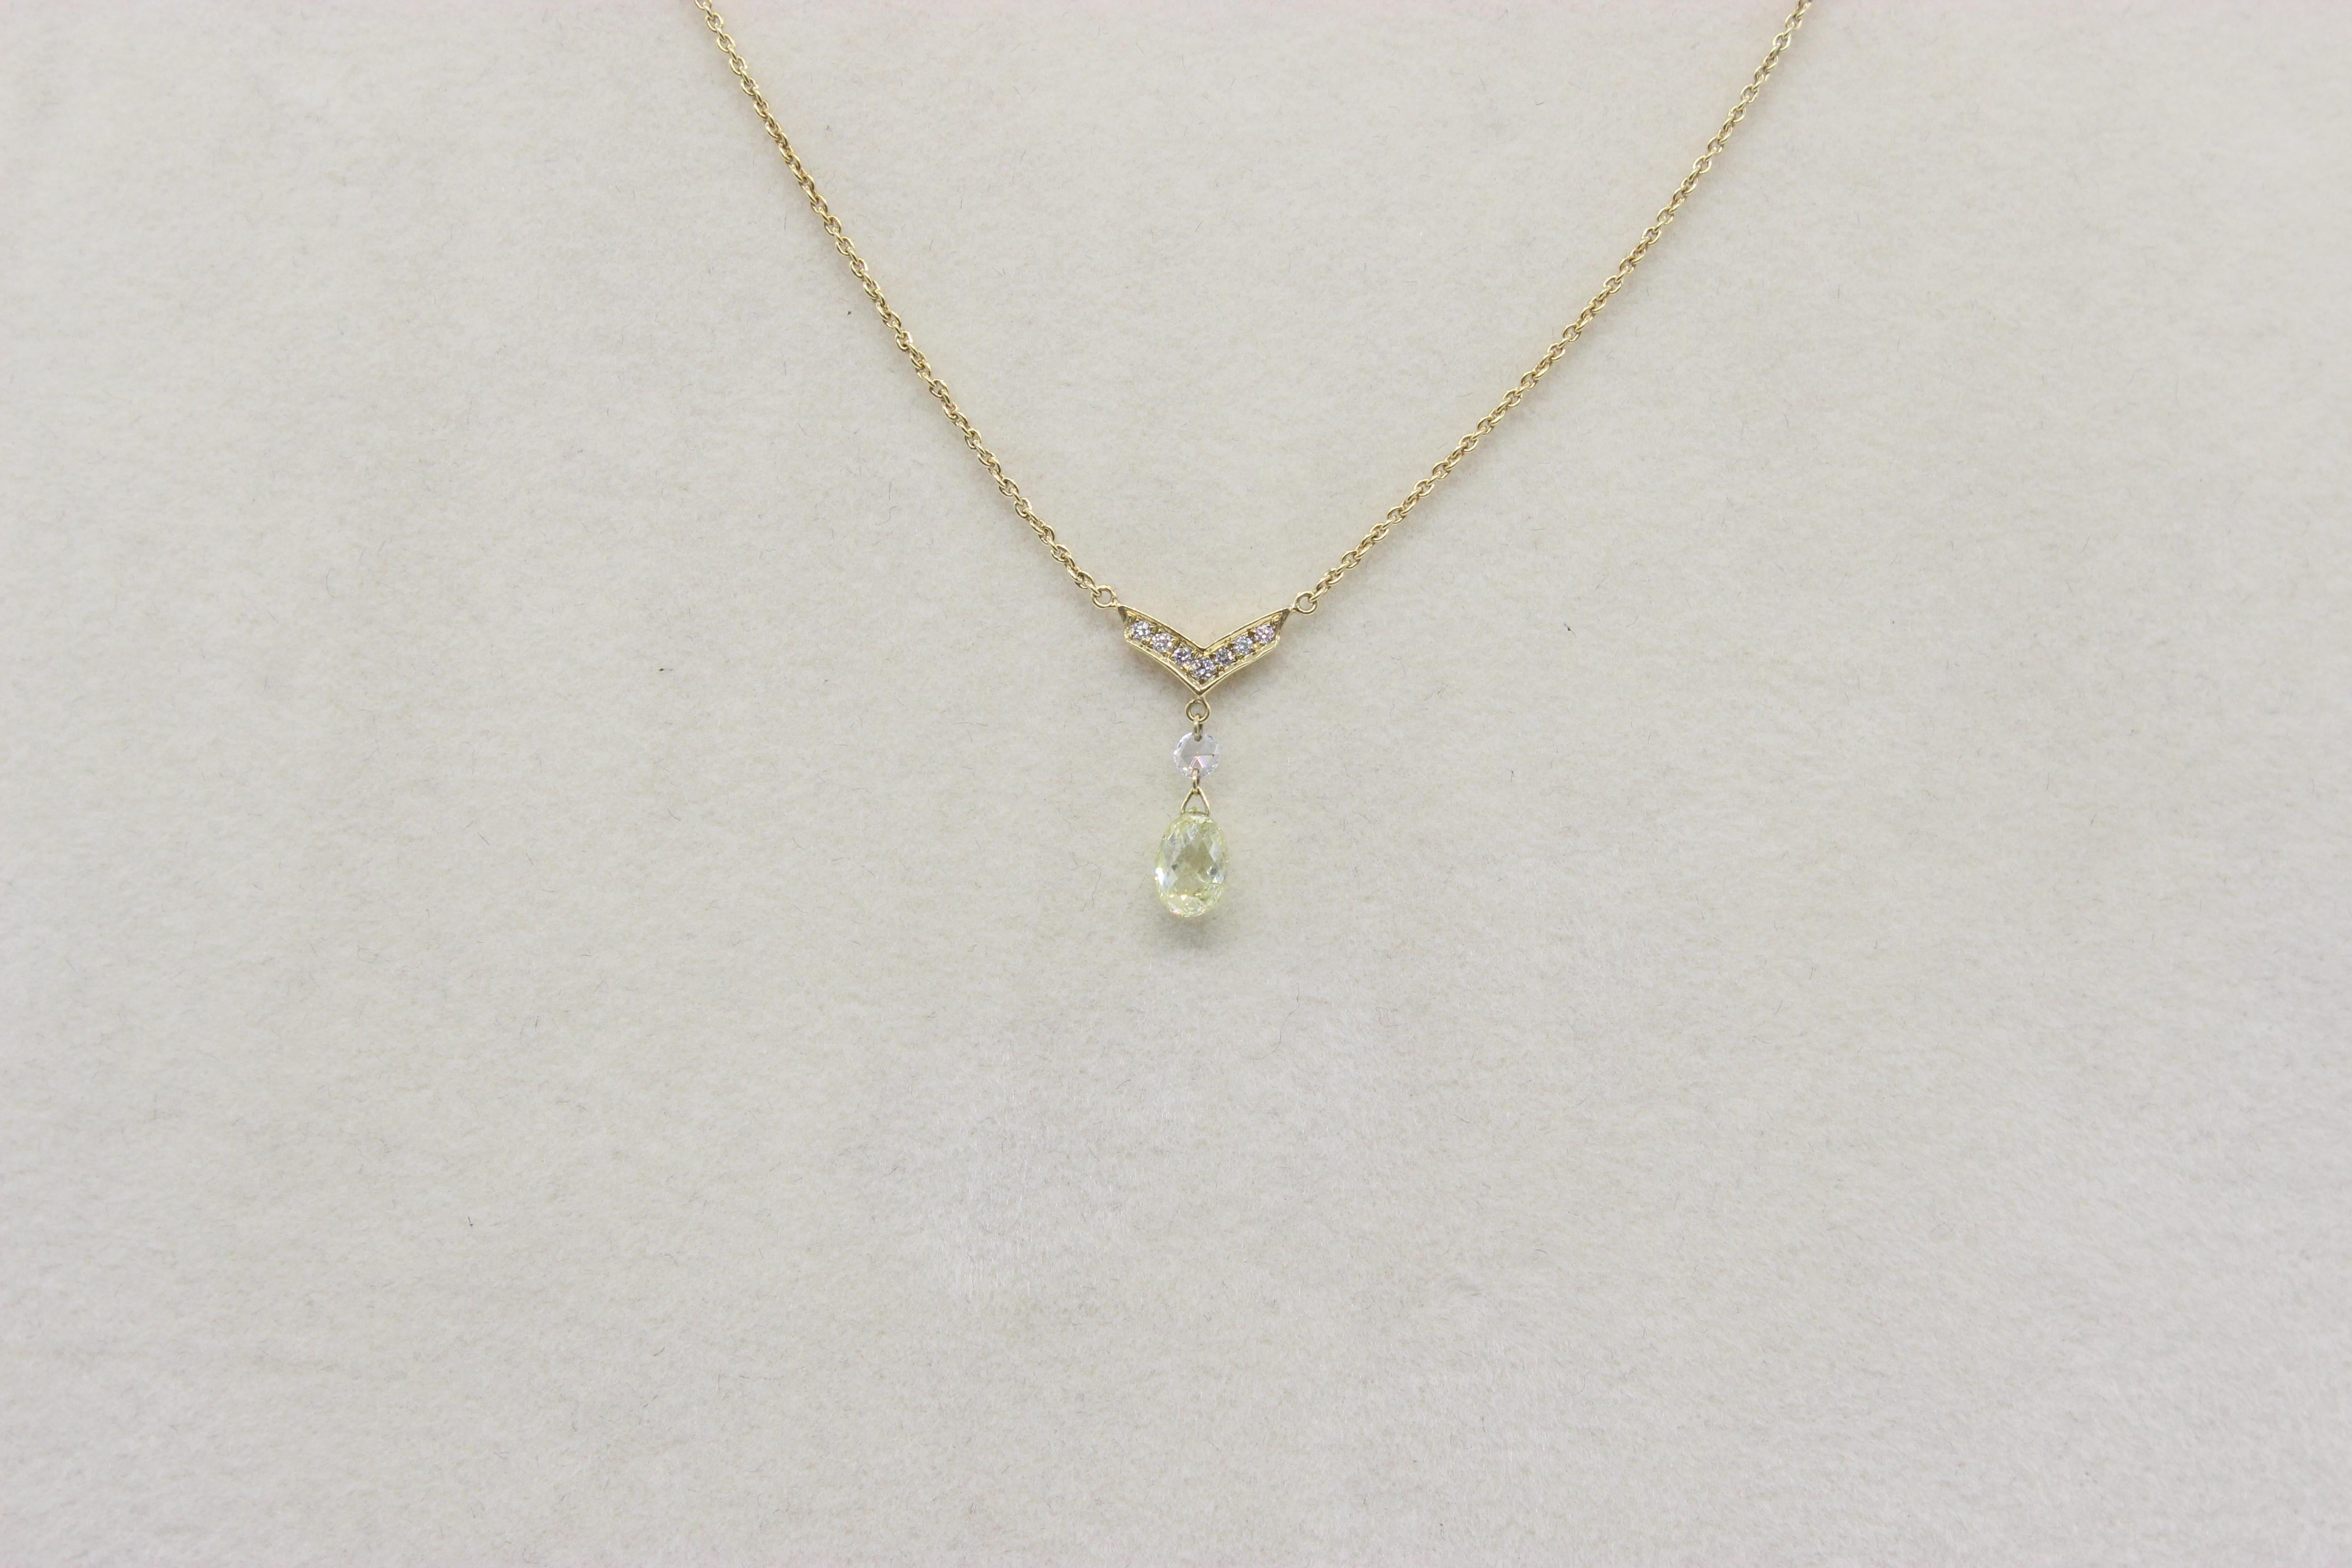 PANIM 0.57 Carat Diamond Briolette 18K Yellow Gold Pendant Necklace In New Condition For Sale In Tsim Sha Tsui, Hong Kong